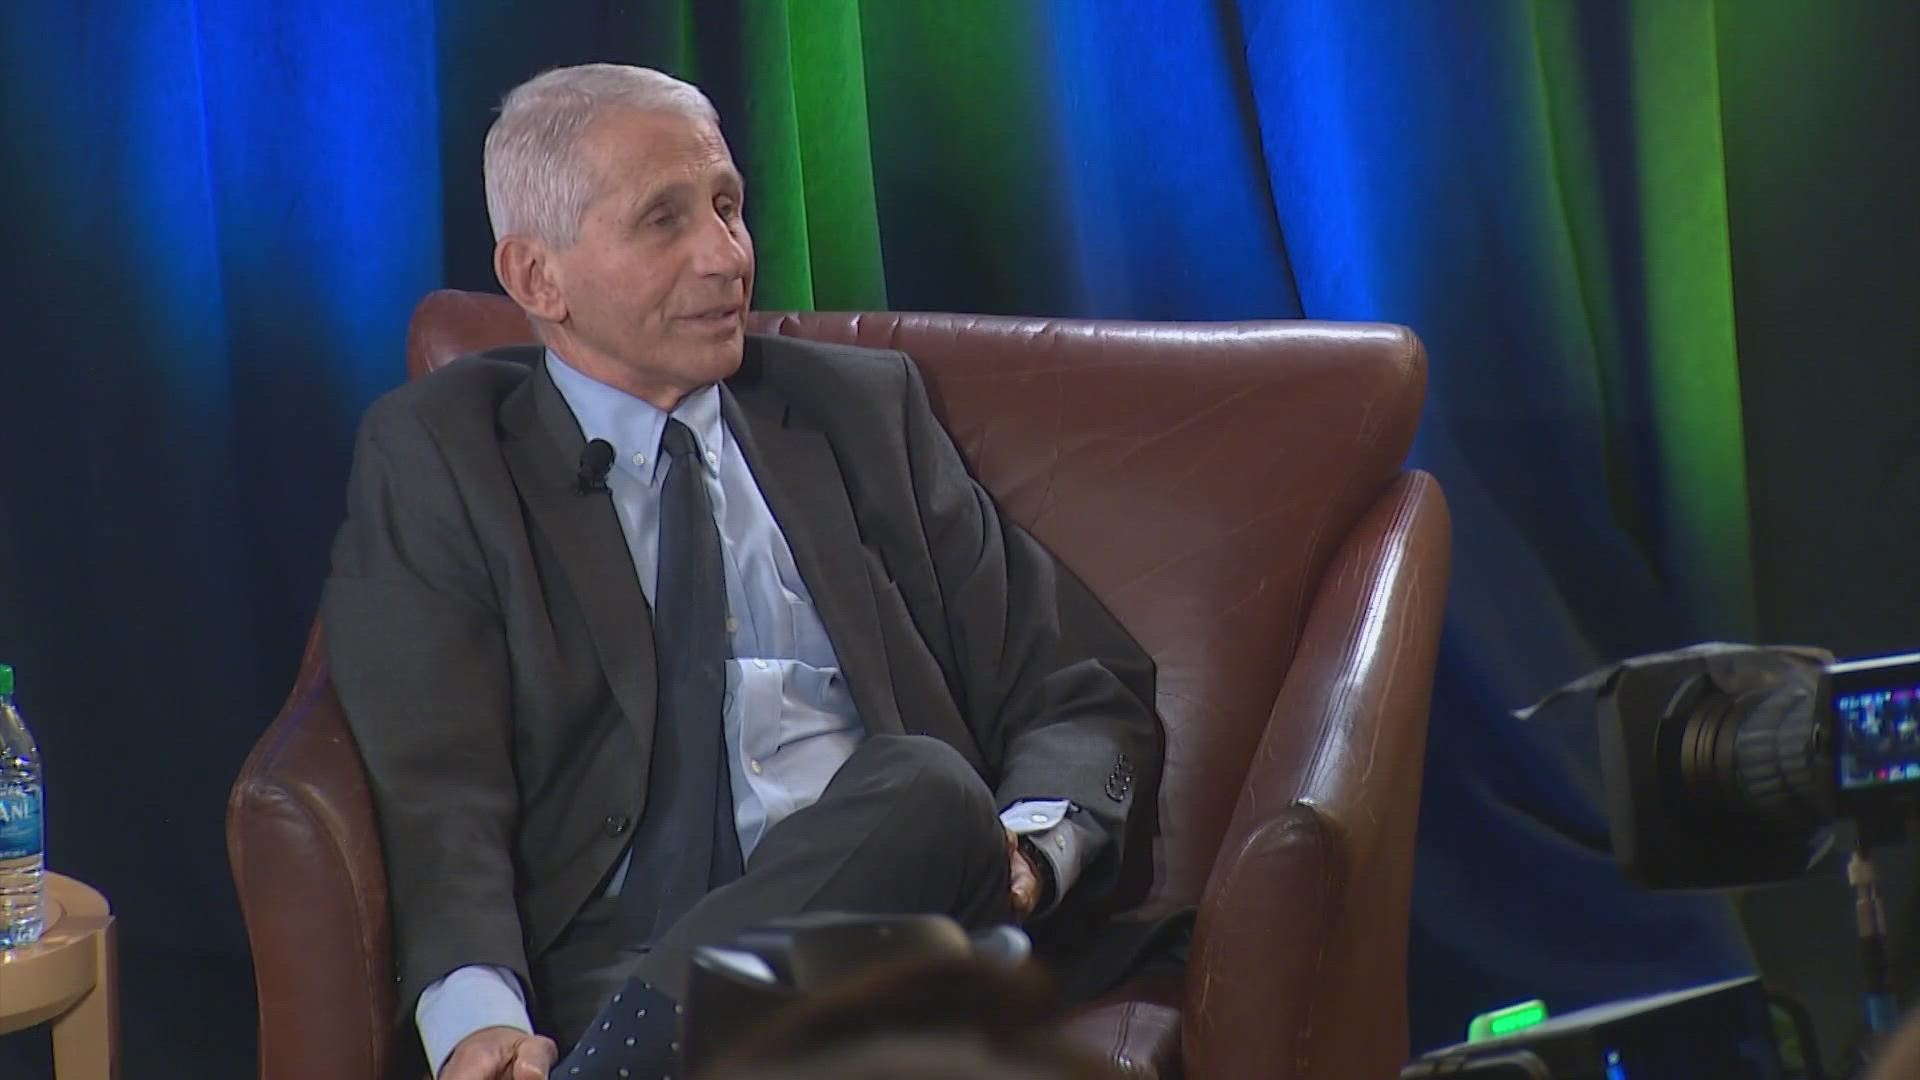 Fauci spoke to a group of about 100 Fred Hutch employees about his career and the direction of the COVID-19 pandemic in the upcoming fall and winter seasons.